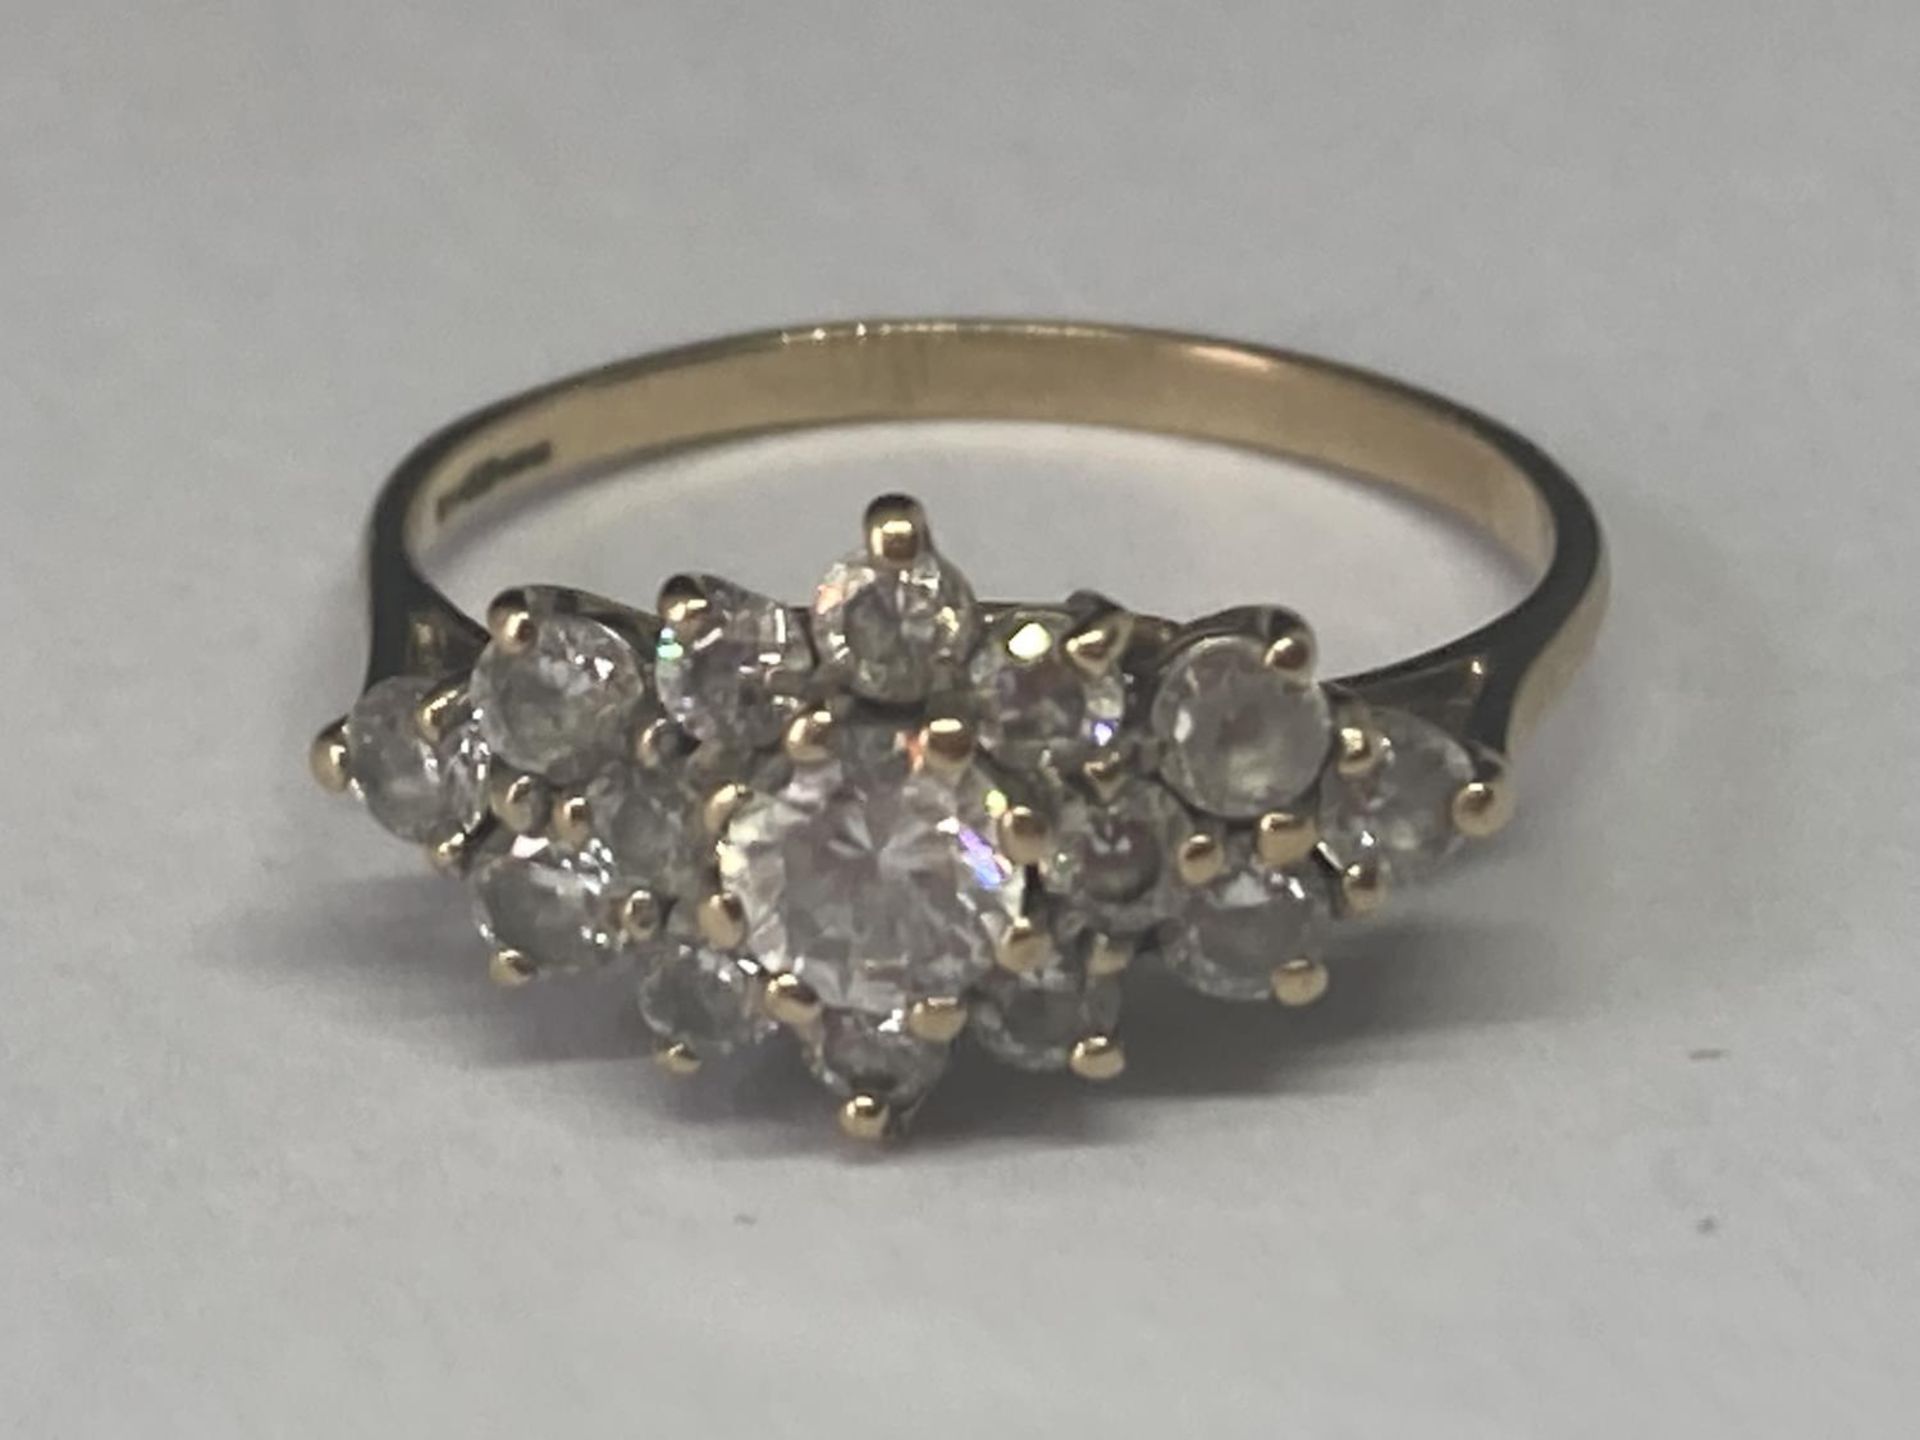 A 9 CARAT GOLD RING WITH CUBIC ZIRCONIAS IN A CLUSTER DESIGN SIZE O - Image 2 of 6